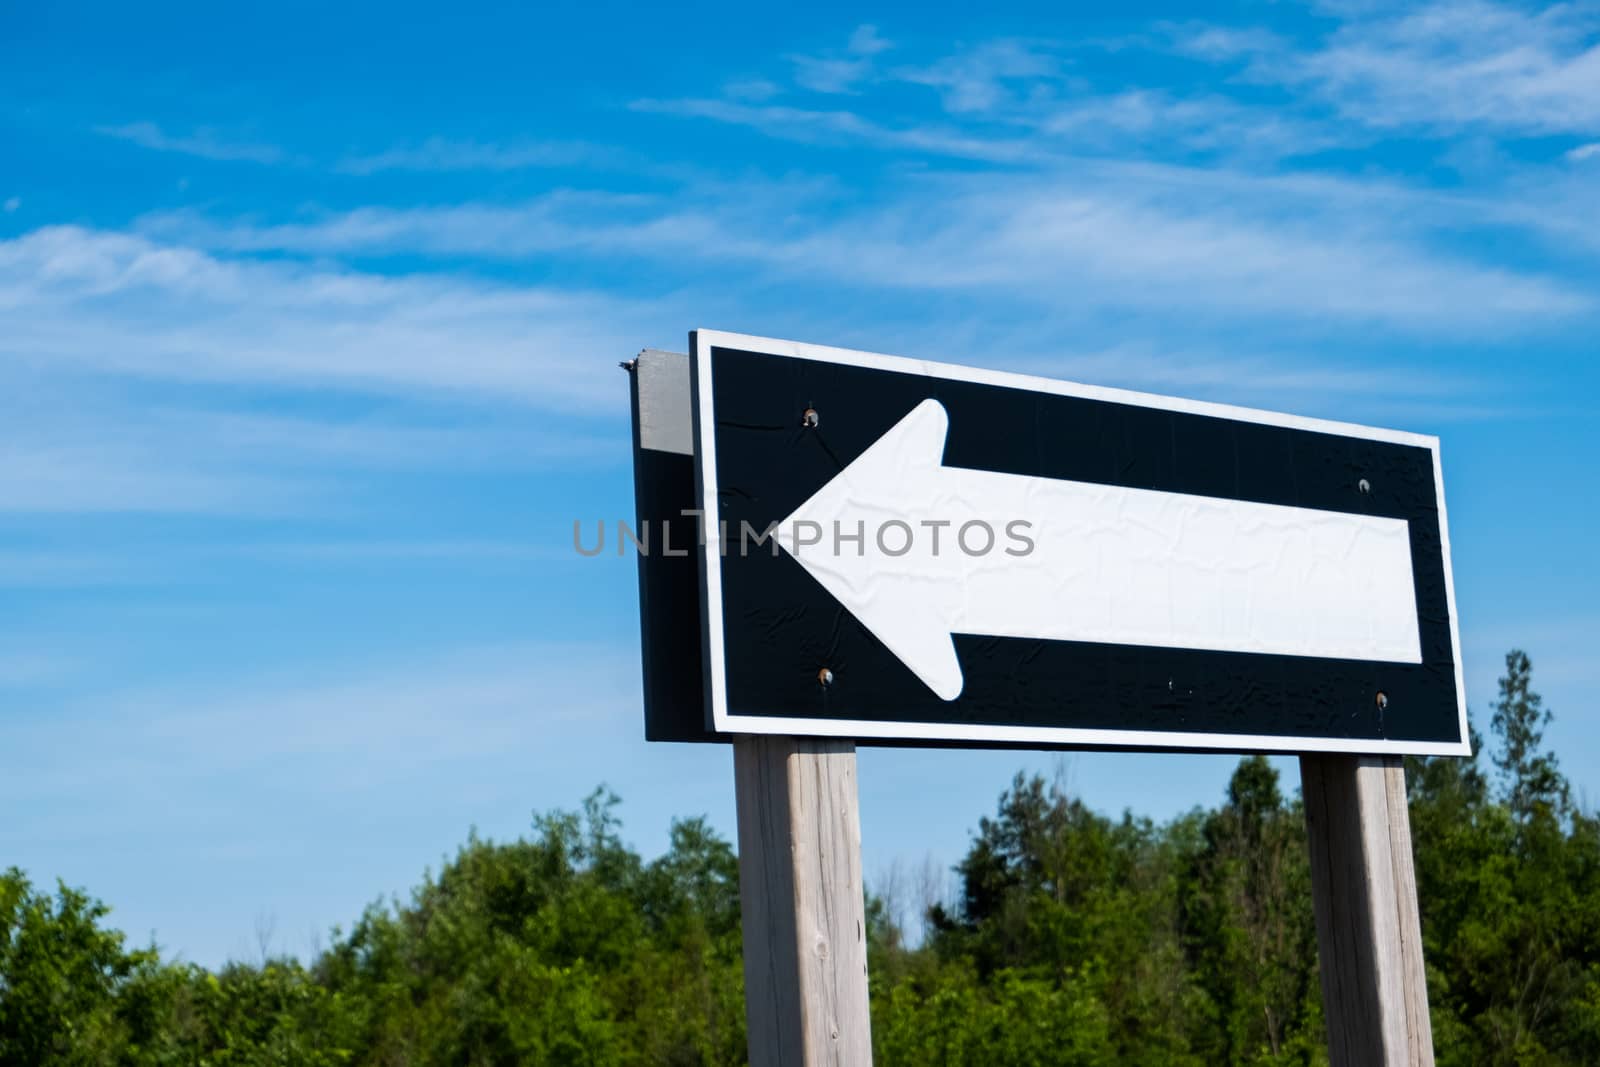 A large black-and-white one-way road sign directs traffic to the left of the frame on a sunny day.